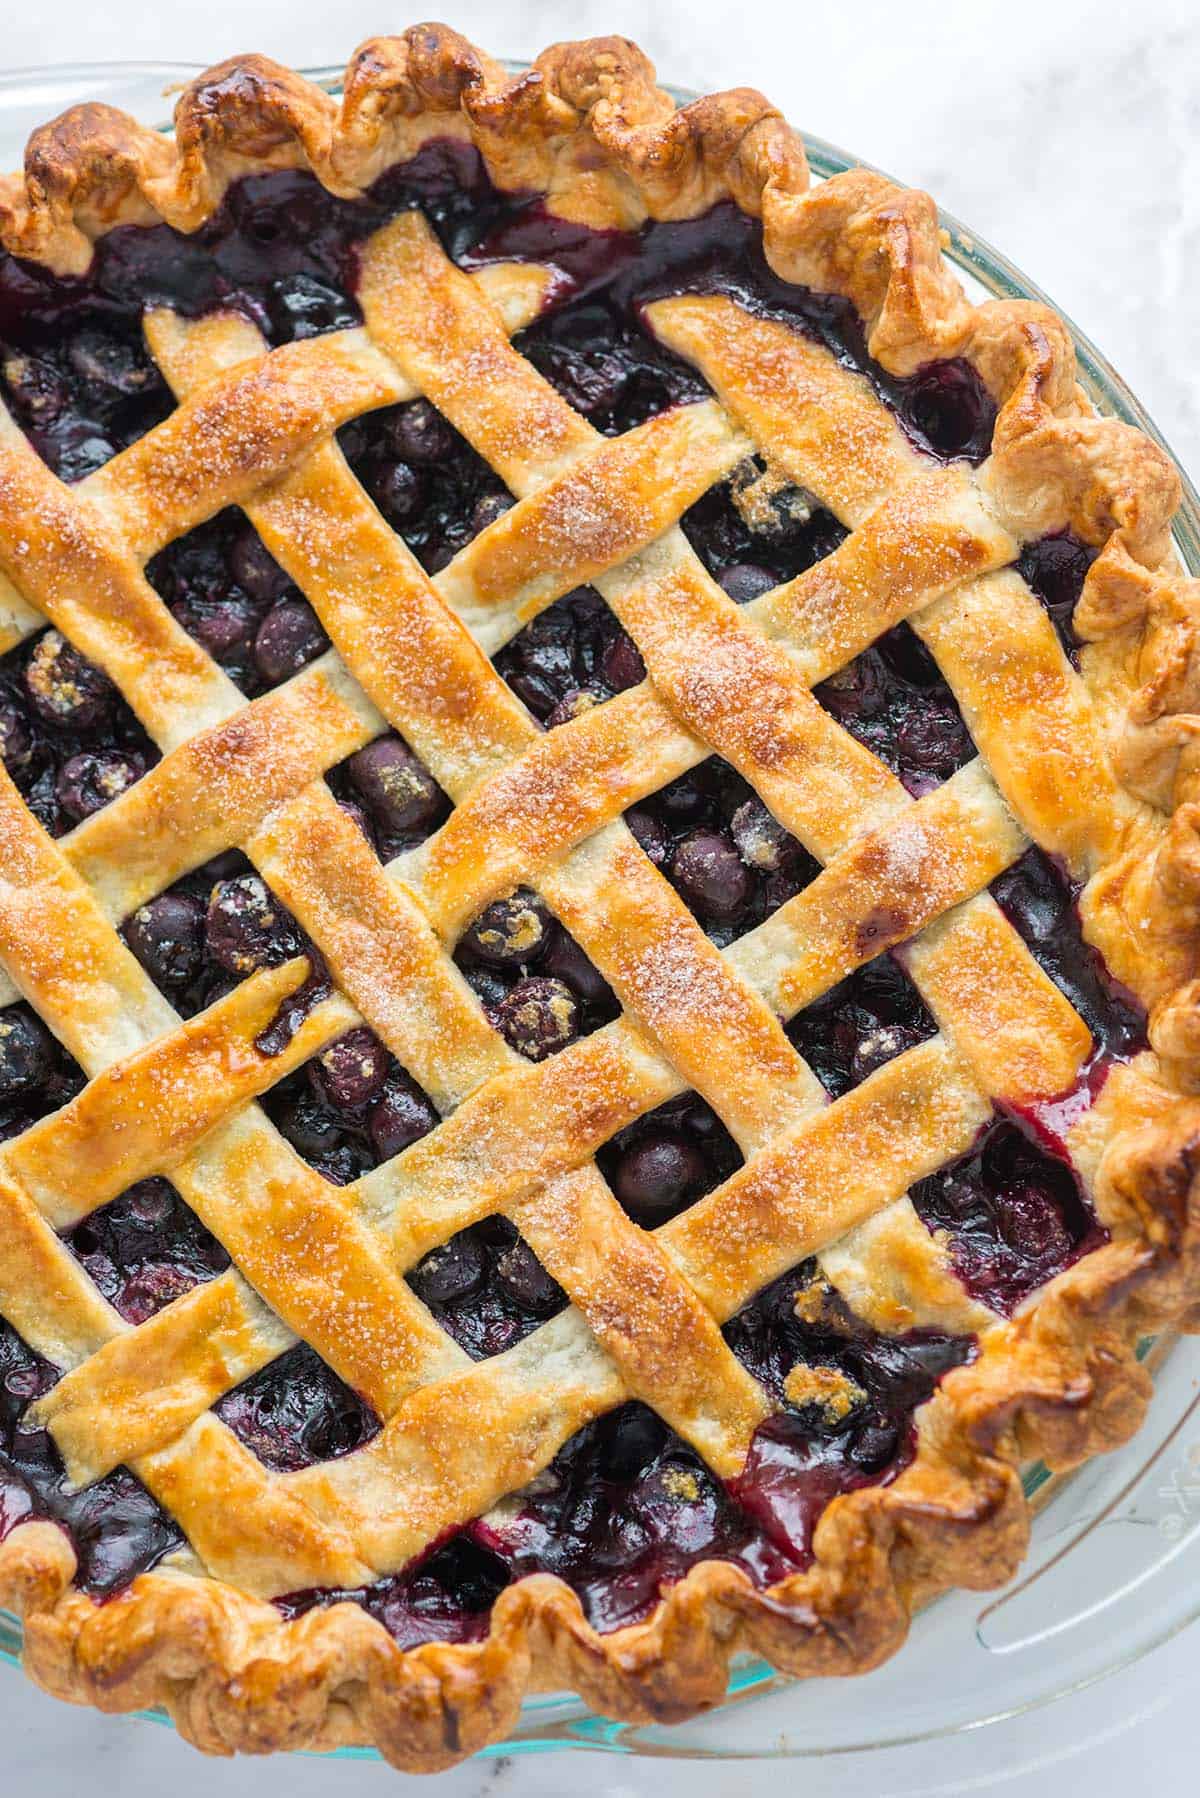 Best Blueberry Pie We've Ever Made